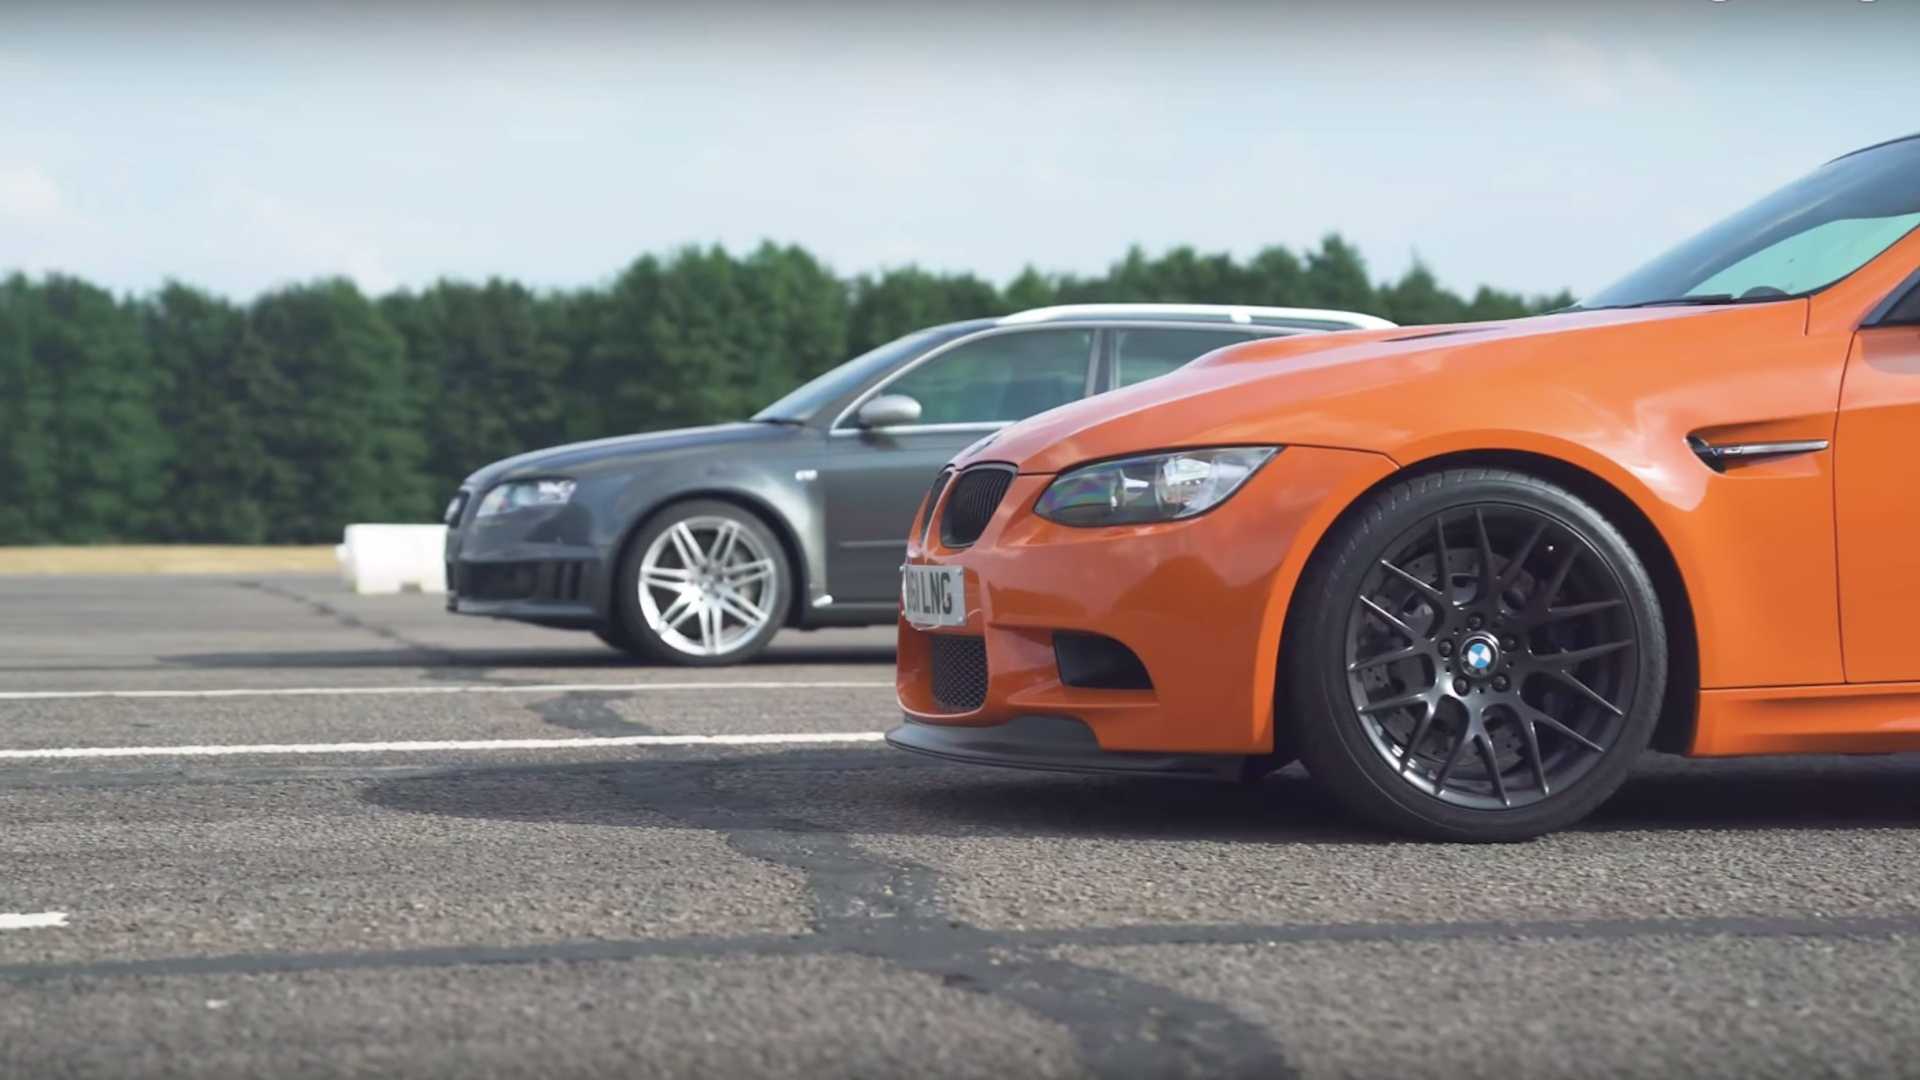 BMW E92 M3 GTS Faces Audi RS4 B7 In Drag Race